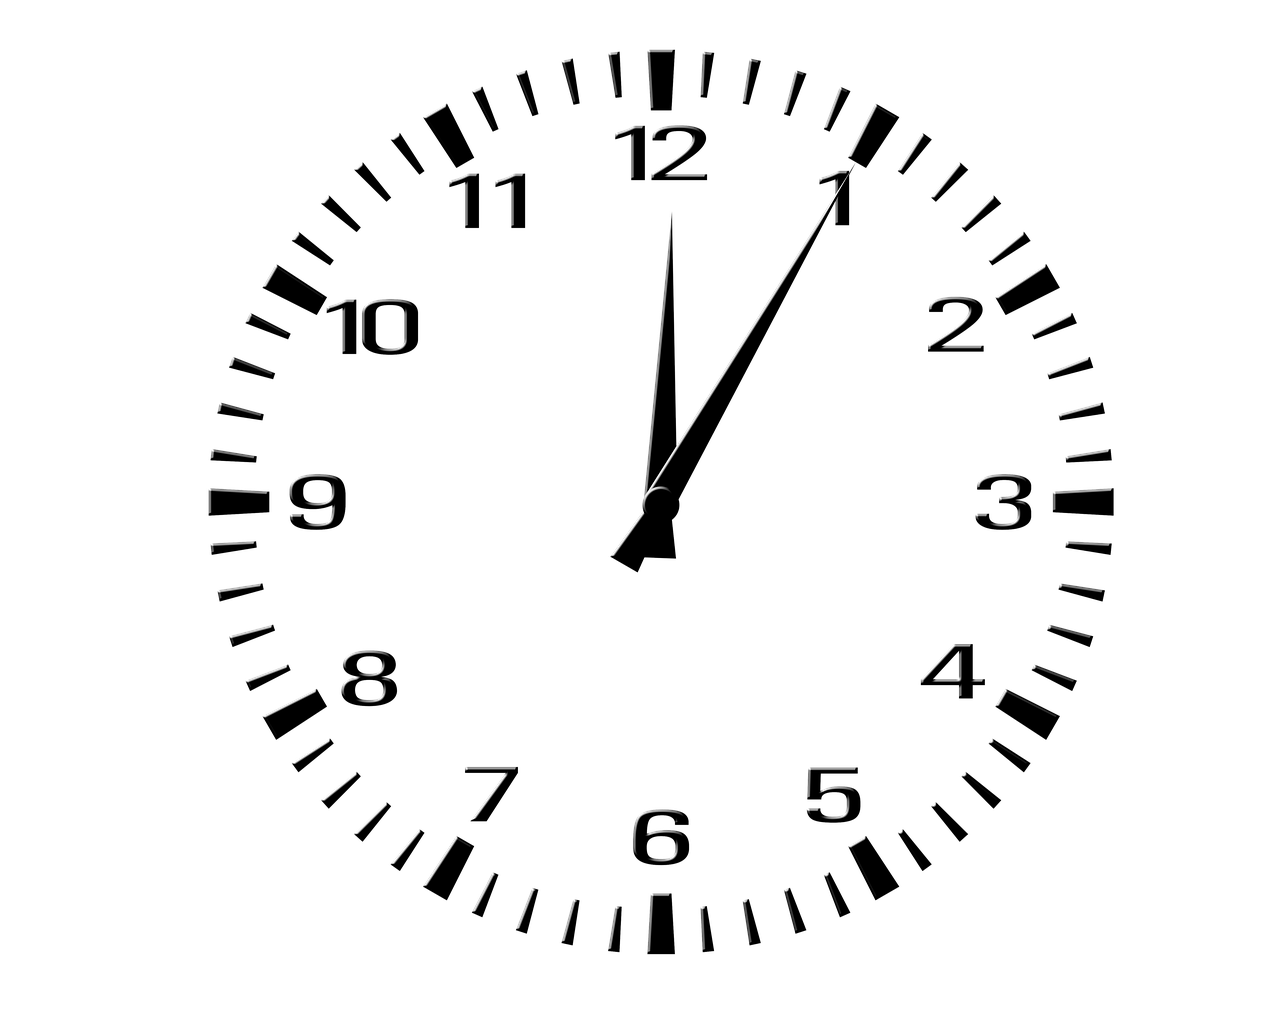 Image of neoclassical clock face.